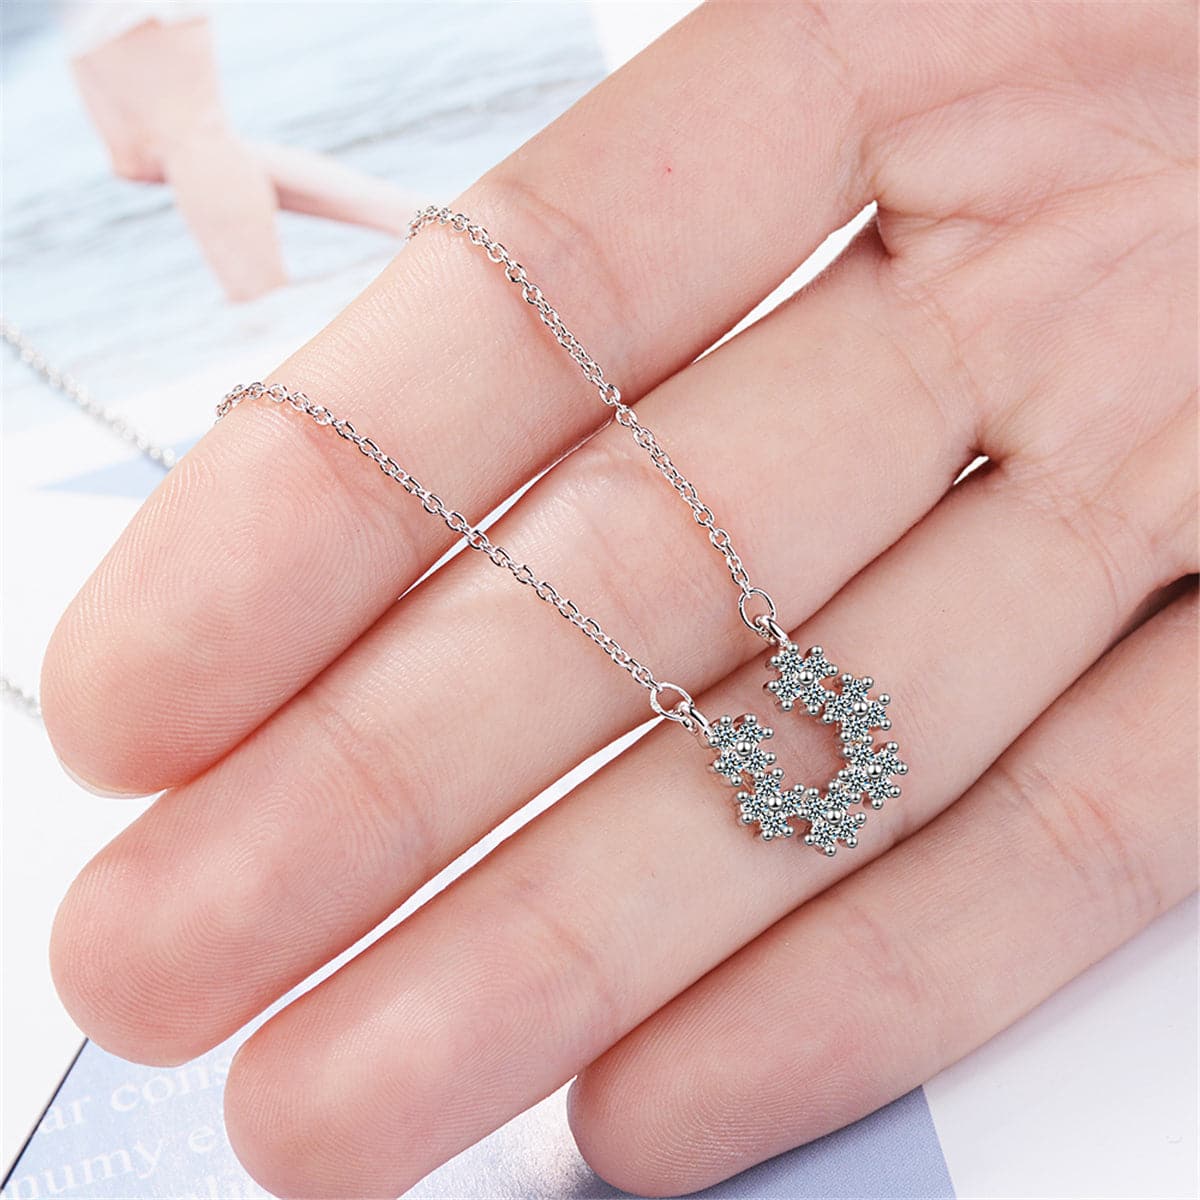 Cubic Zirconia & Silver-Plated Linking Flower Pendant Necklace